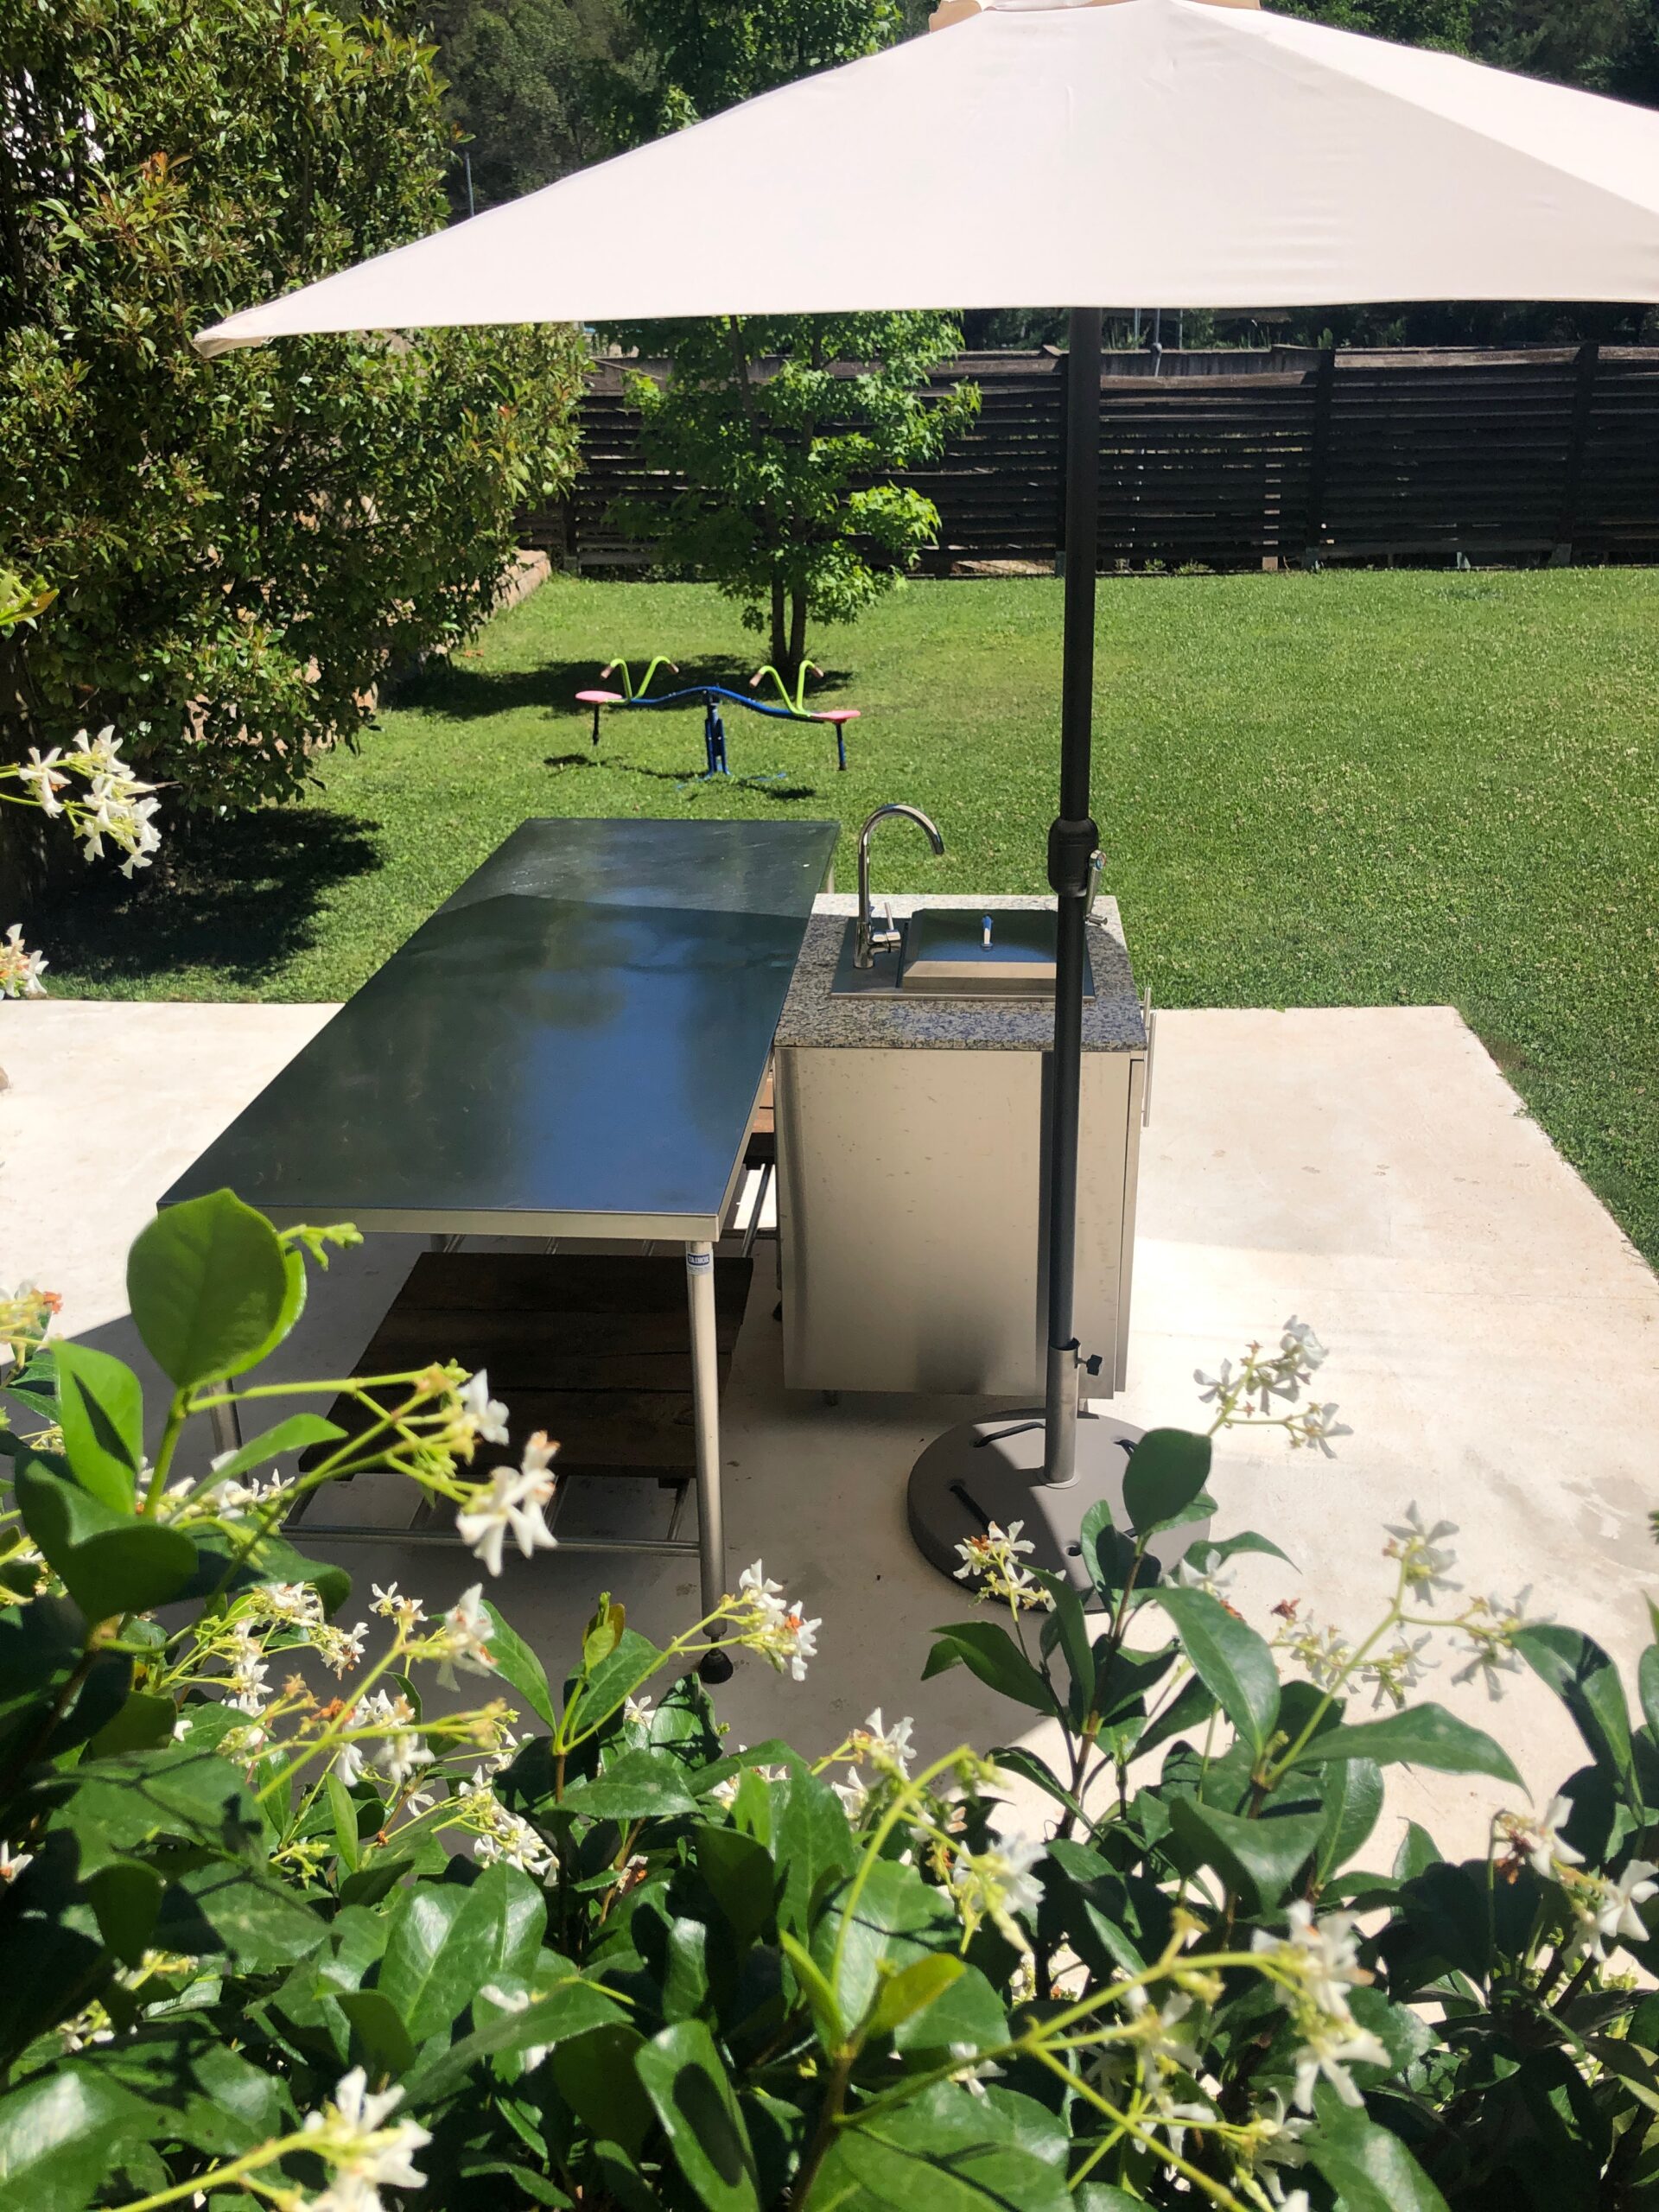 Detail of the outdoor barbecue with large stainless steel table in the center and furniture with kitchen sink and large umbrella. In the background the garden, you can also see a jasmine vine with white flower.